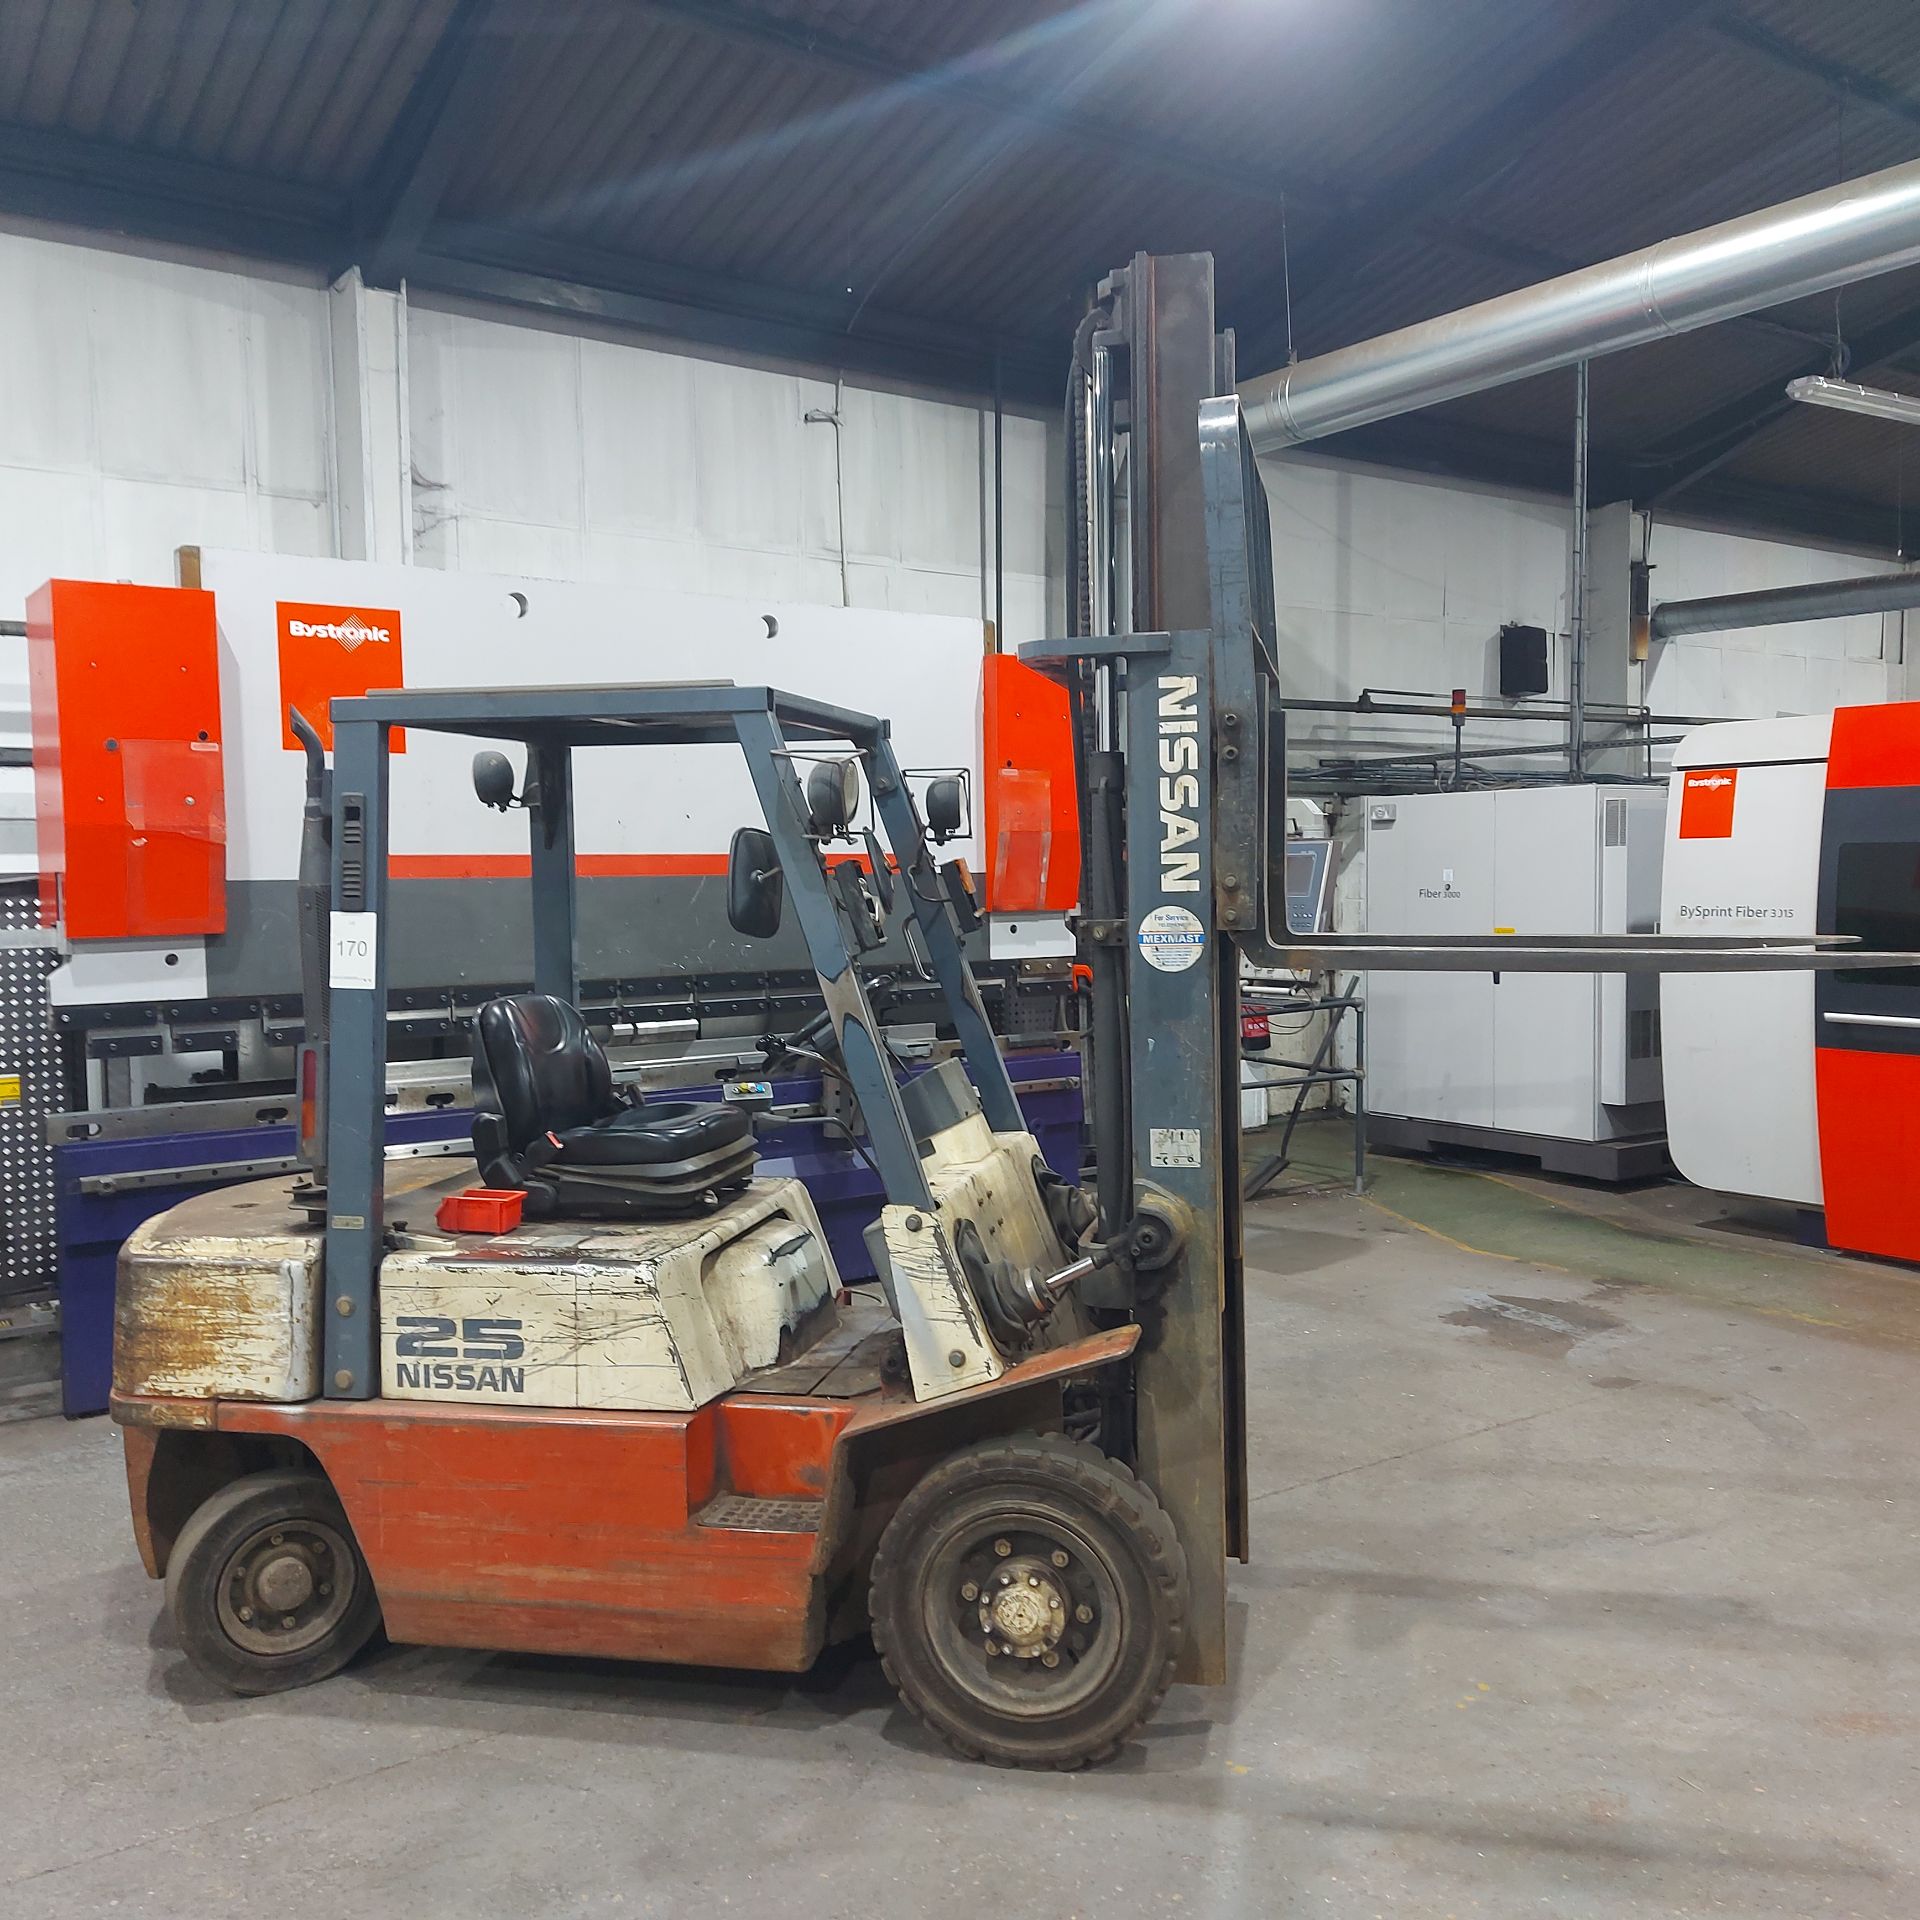 Nissan 25 2500Kg Diesel Forklift (please note this may not be removed until last day of clearance)